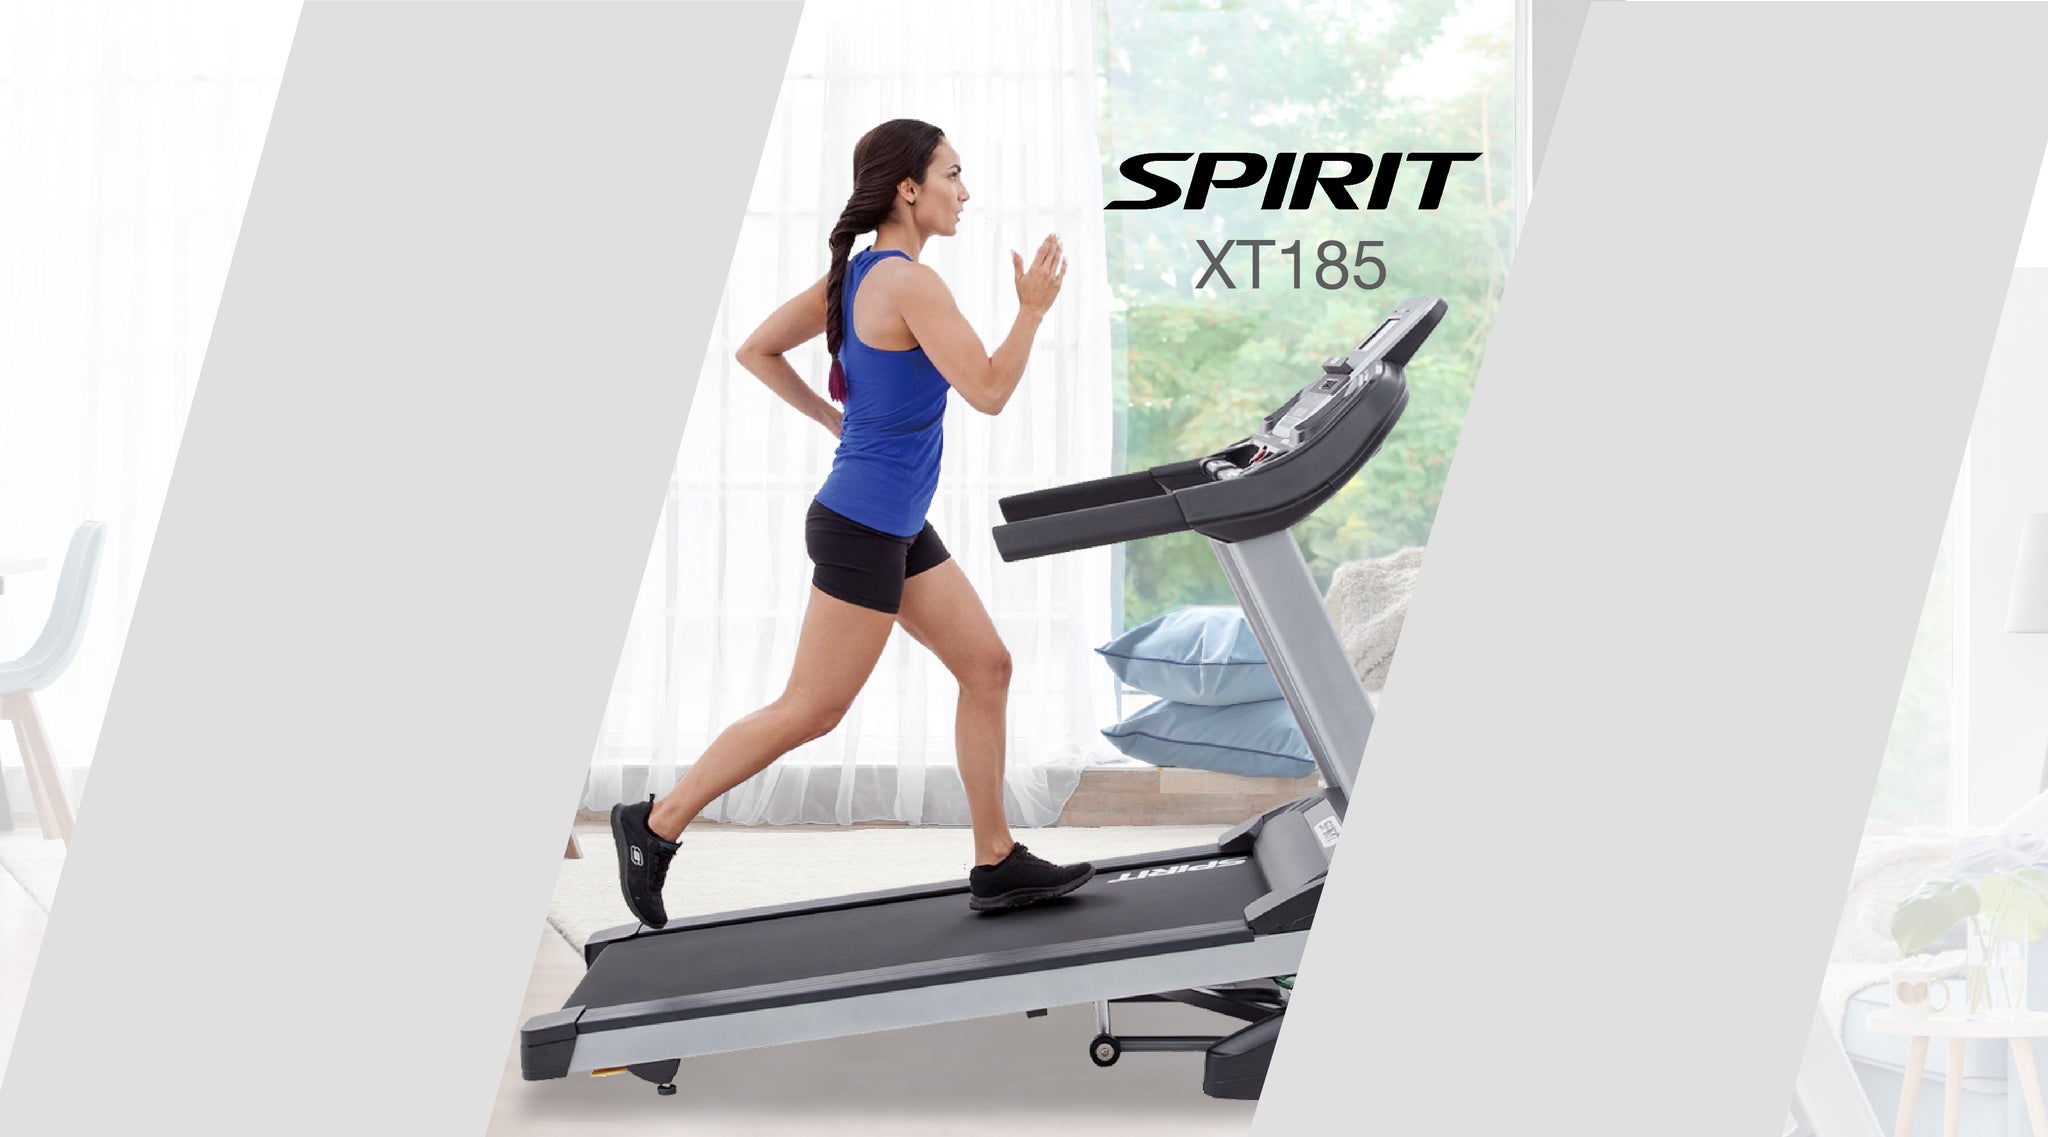 Is The Spirit XT185 YOUR Ideal Entry-Level Treadmill? - Flaman Fitness